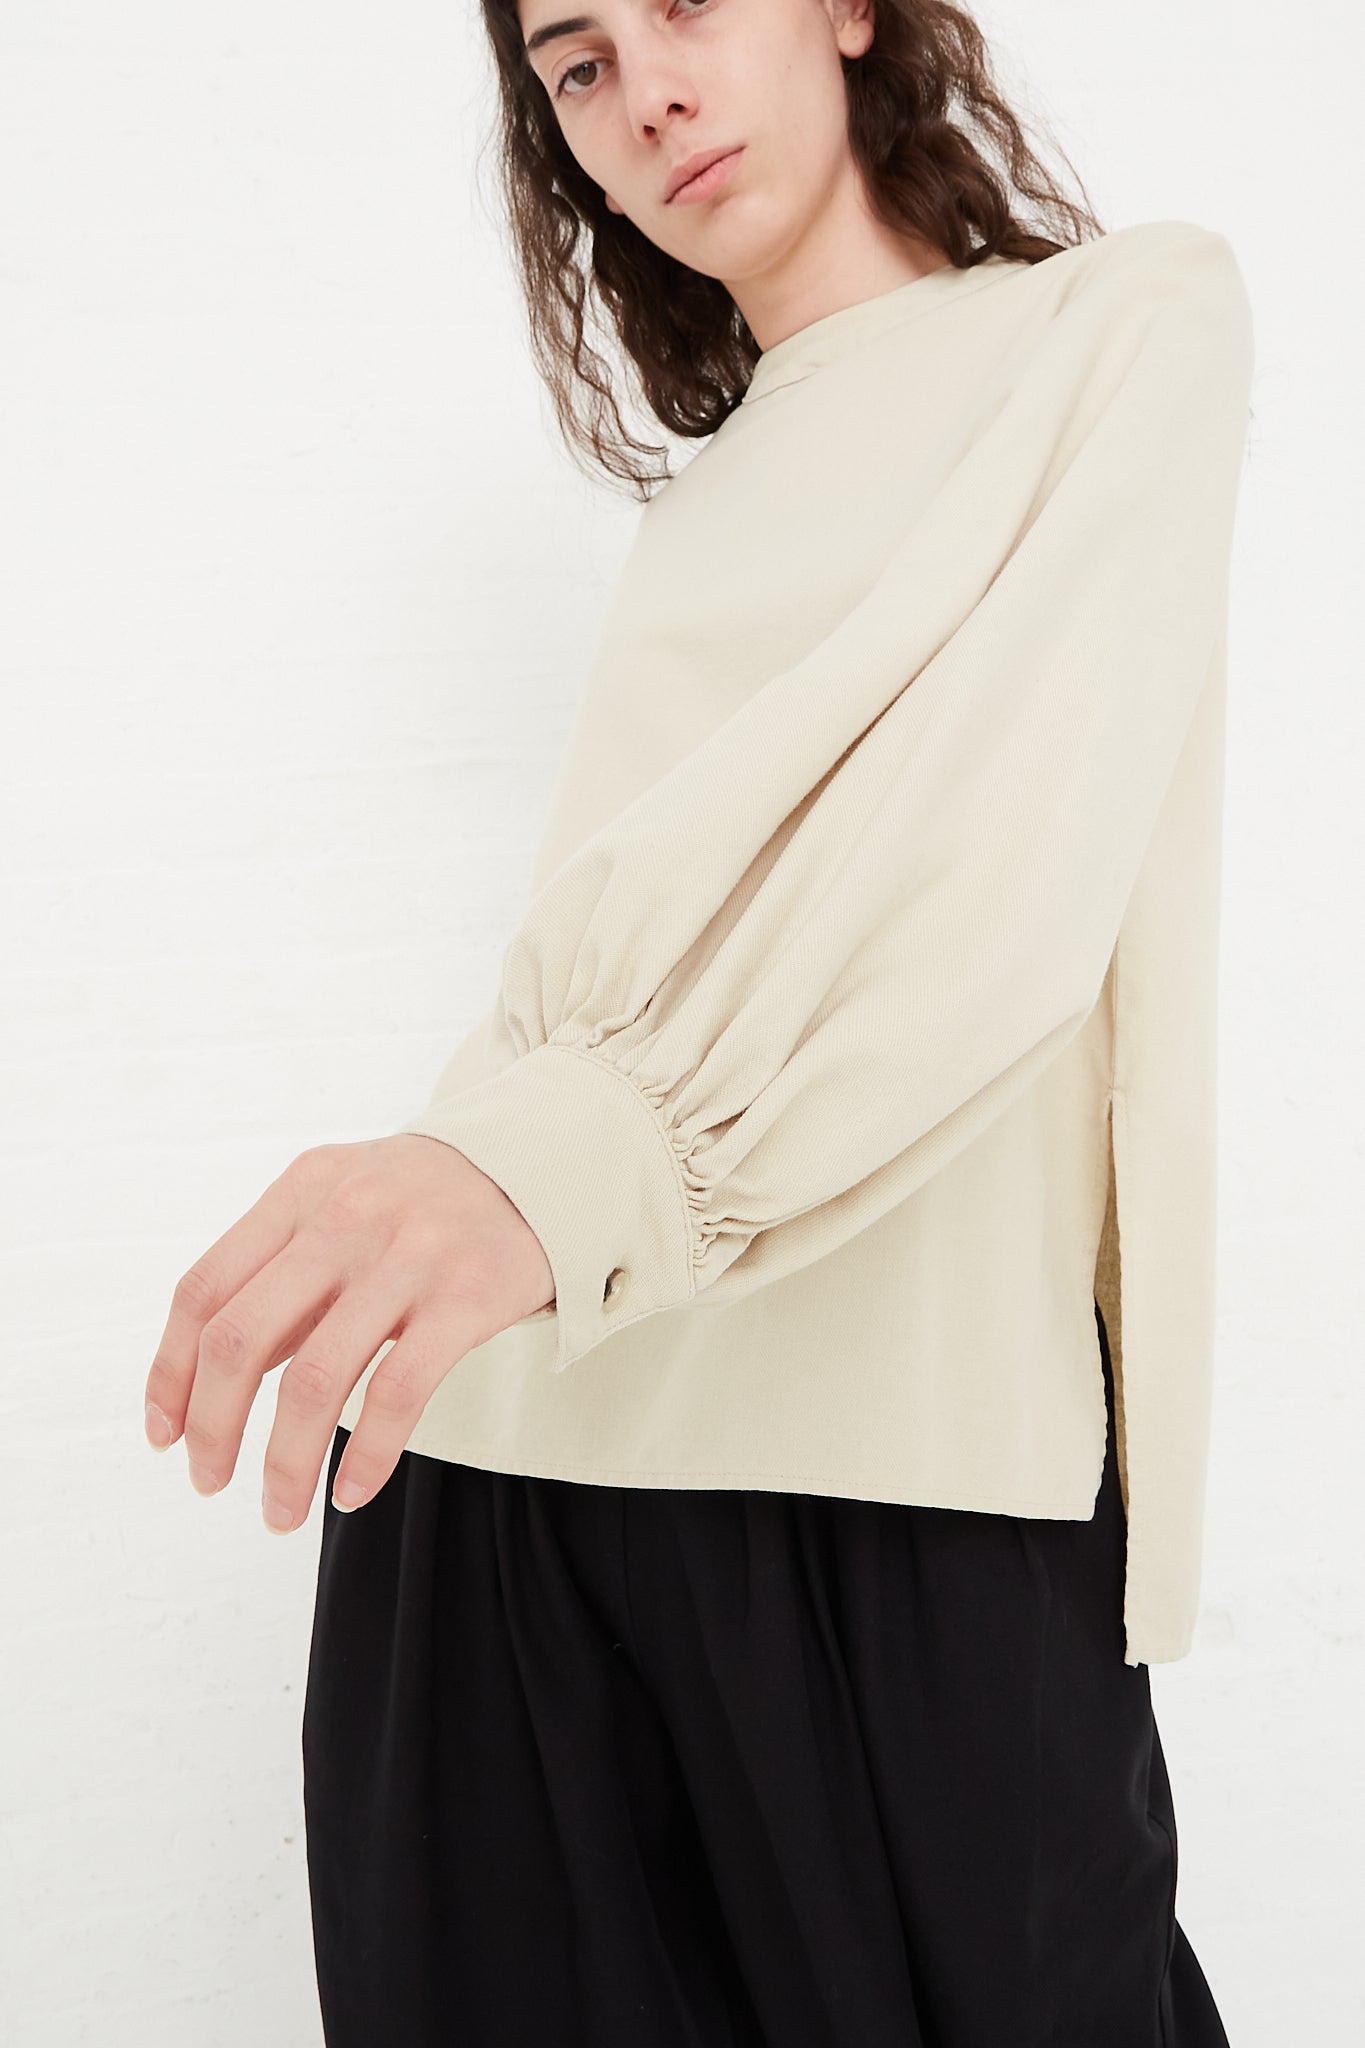 Cotton Twill Puff Sleeve Blouse in Ivory by Black Crane for Oroboro Side Sleeve